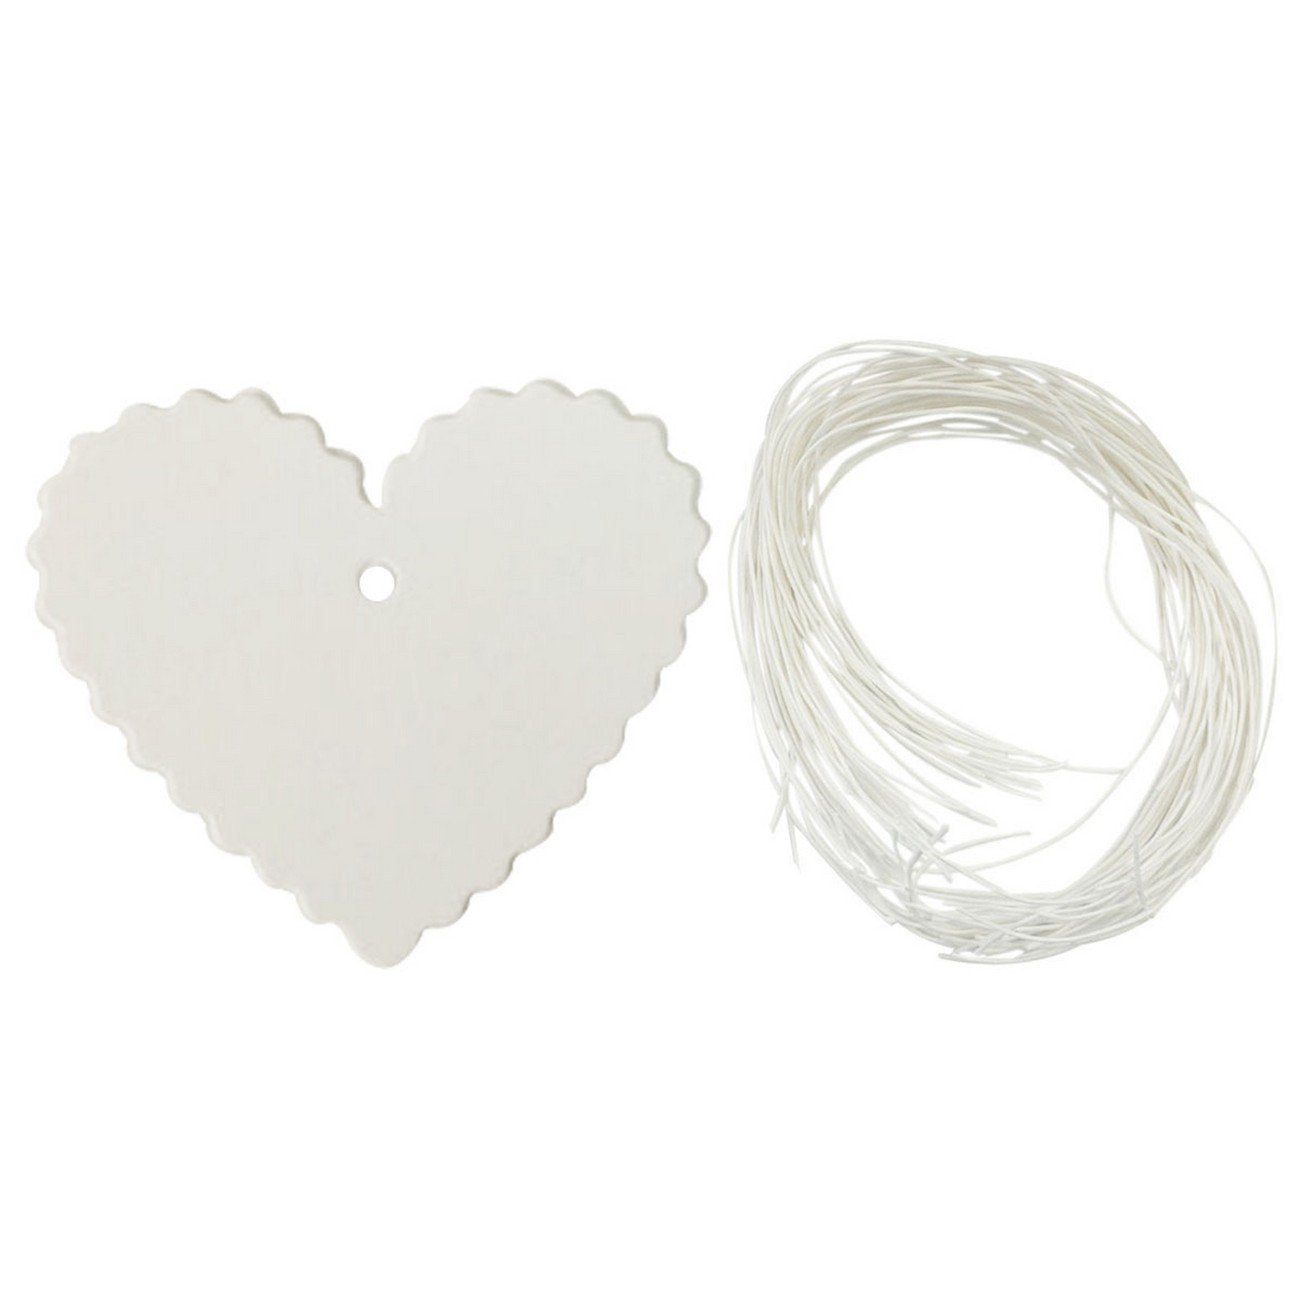 Wrapables 50 Gift Tags with Free Cut Strings - White Heart